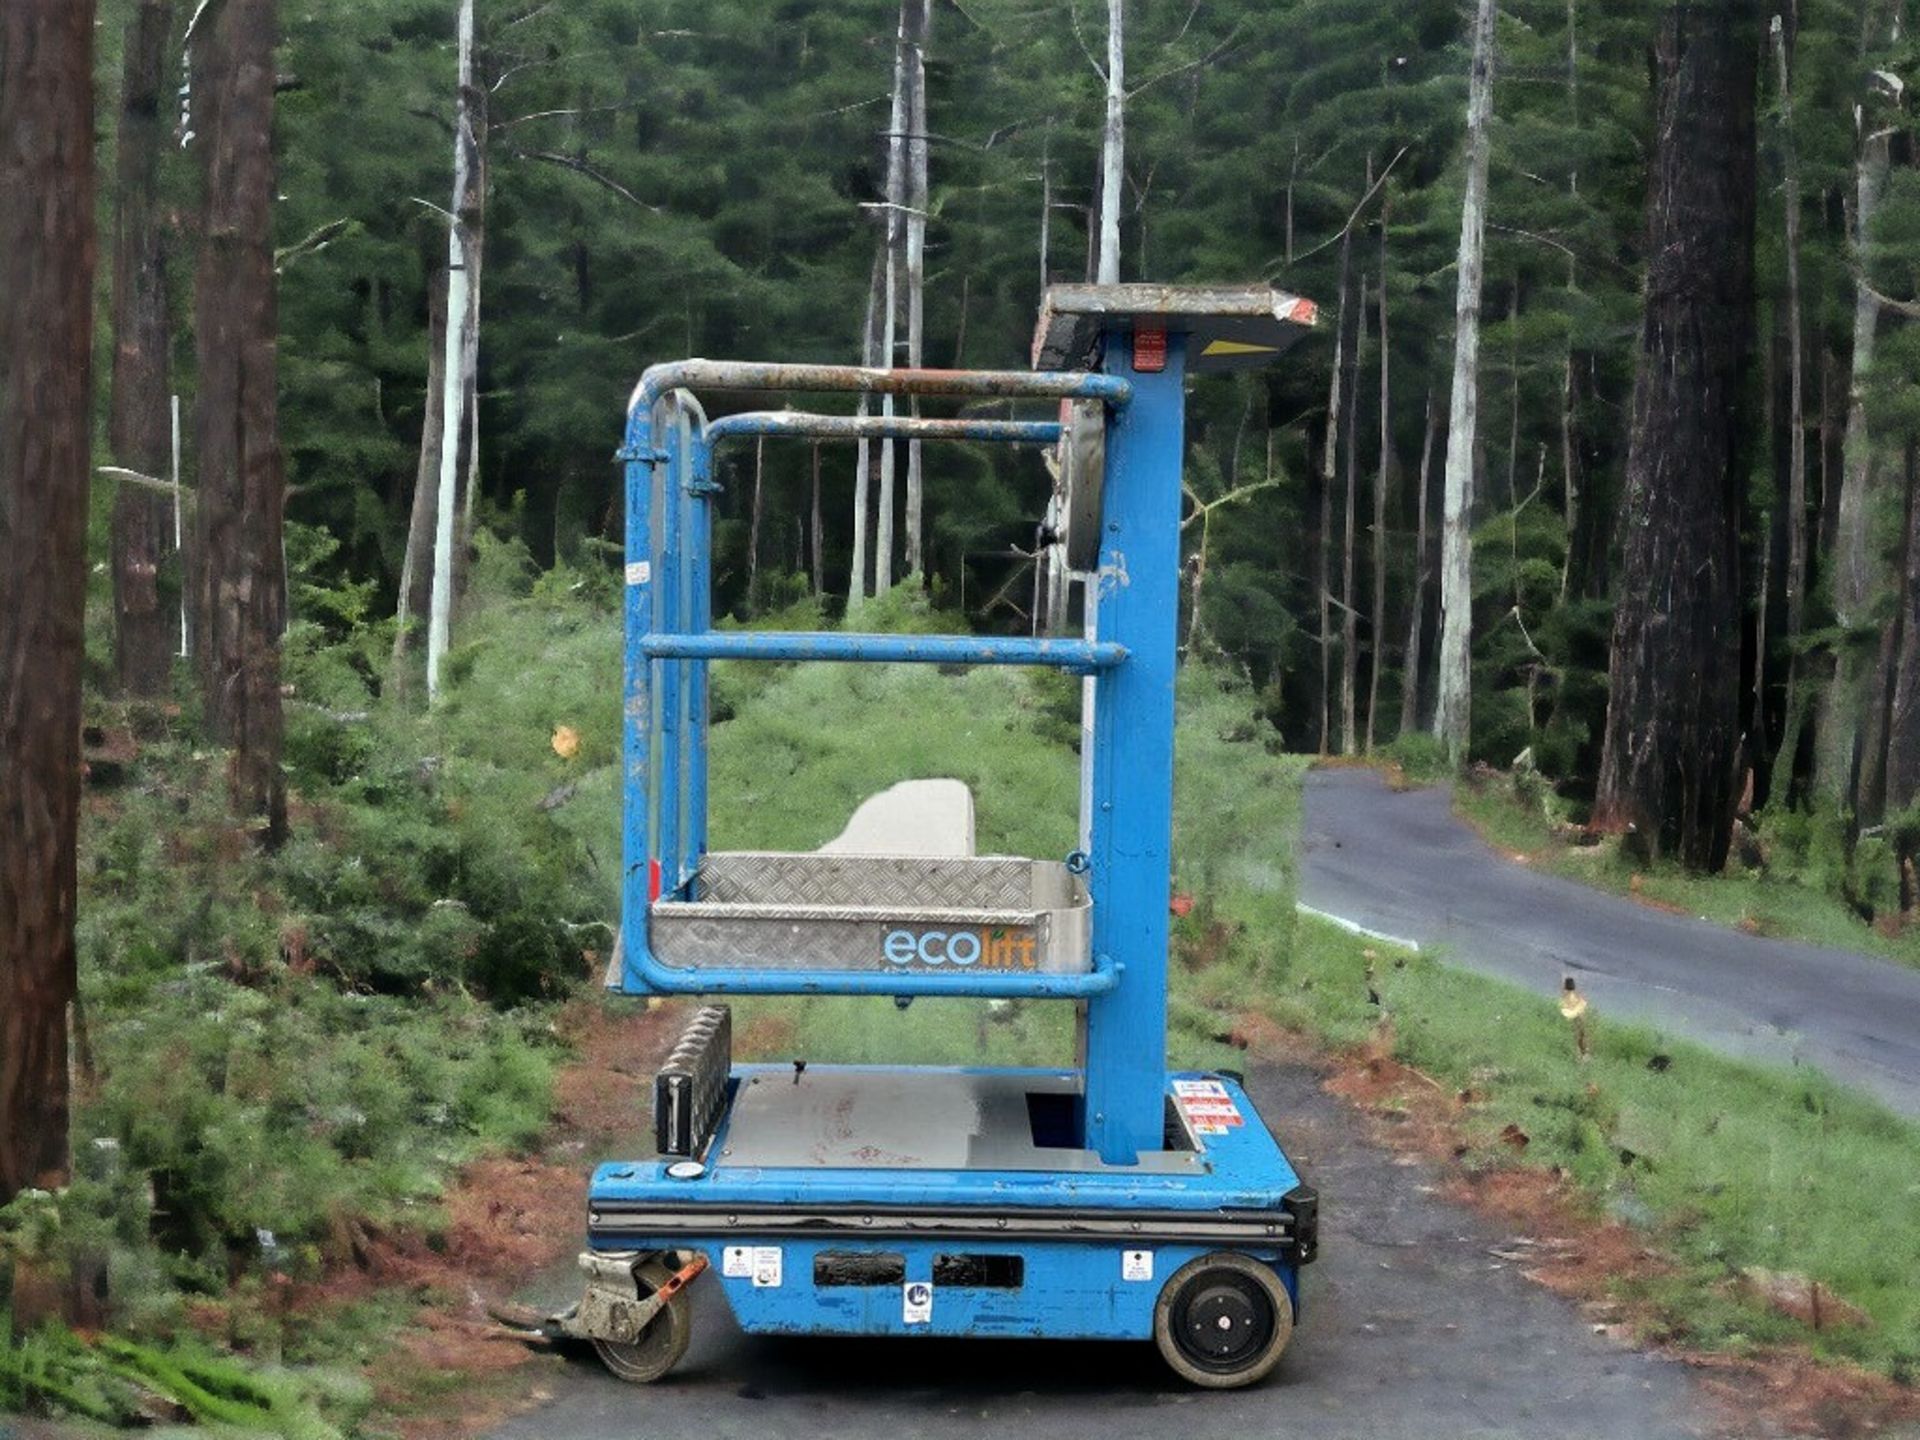 ENHANCE EFFICIENCY WITH THE 2018 POWER TOWER ECOLIFT PUSH AROUND LIFT